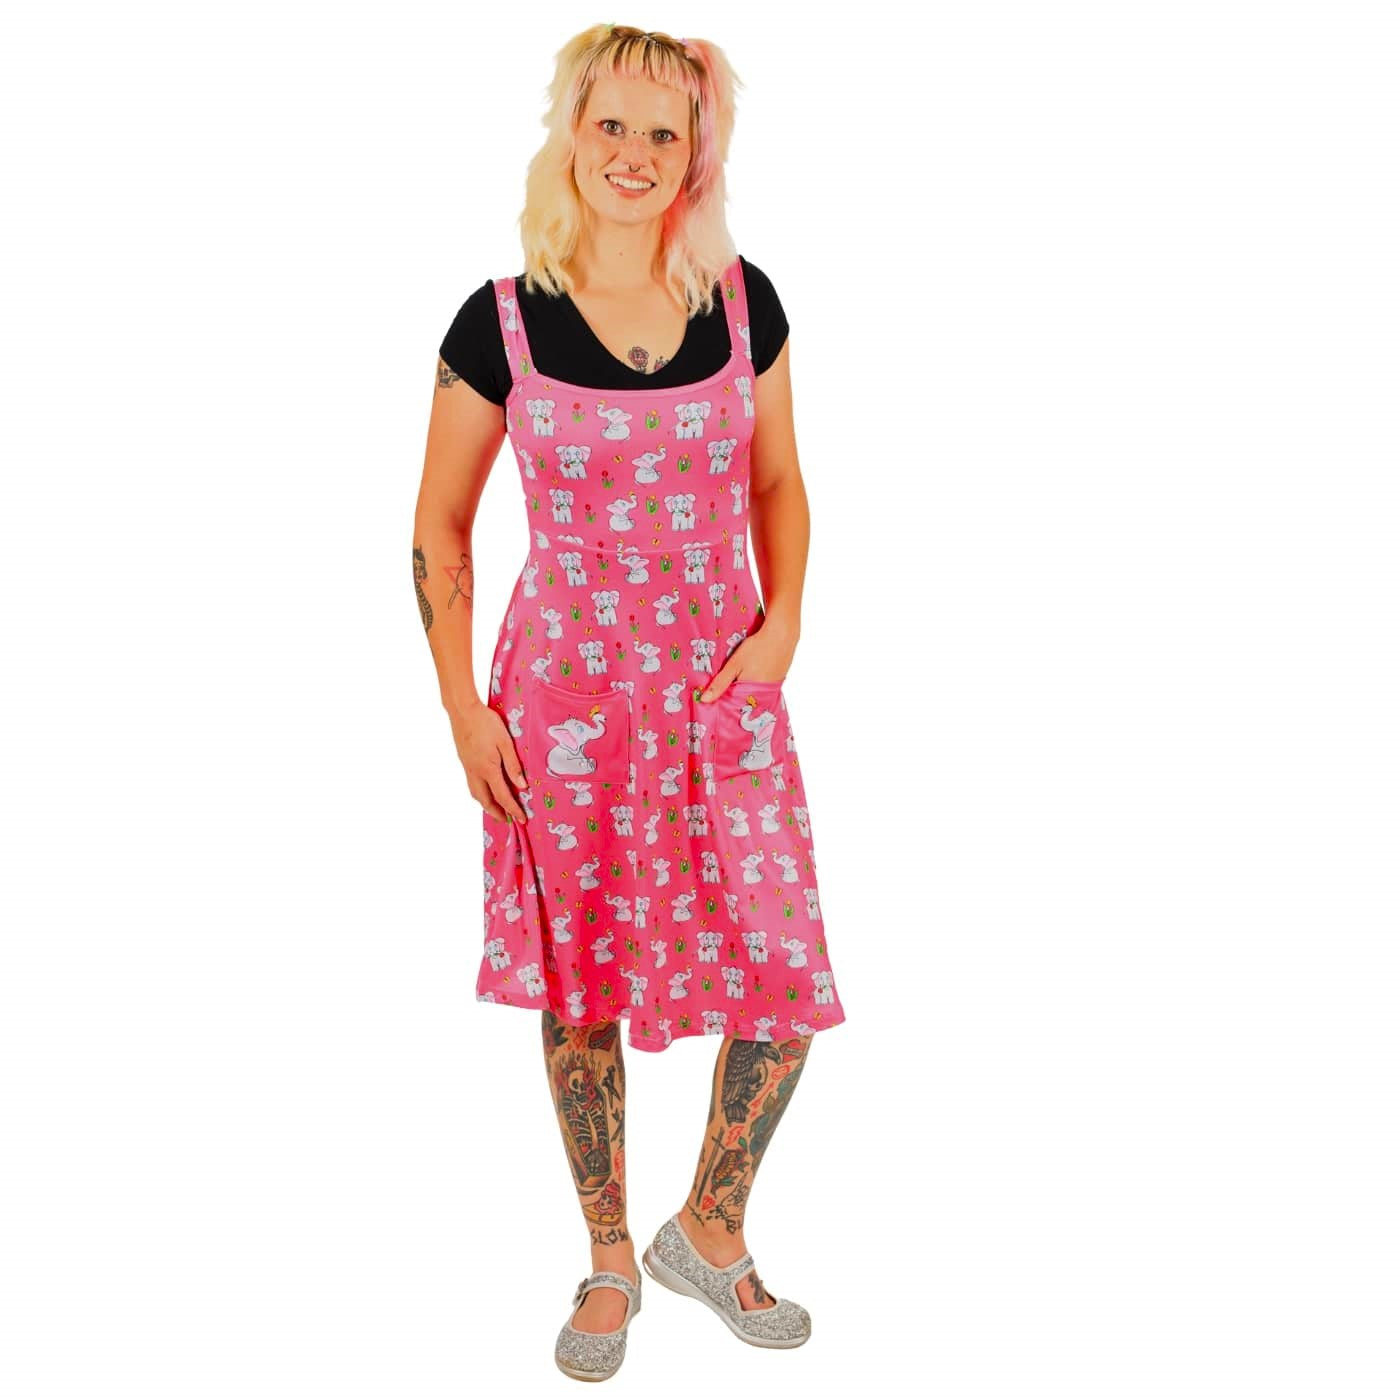 Parade Pinafore by RainbowsAndFairies.com.au (Elephant - Tulips - Pink - Dress With Pockets - Pinny - Kitsch - Vintage Inspired) - SKU: CL_PFORE_PARAD_ORG - Pic-02